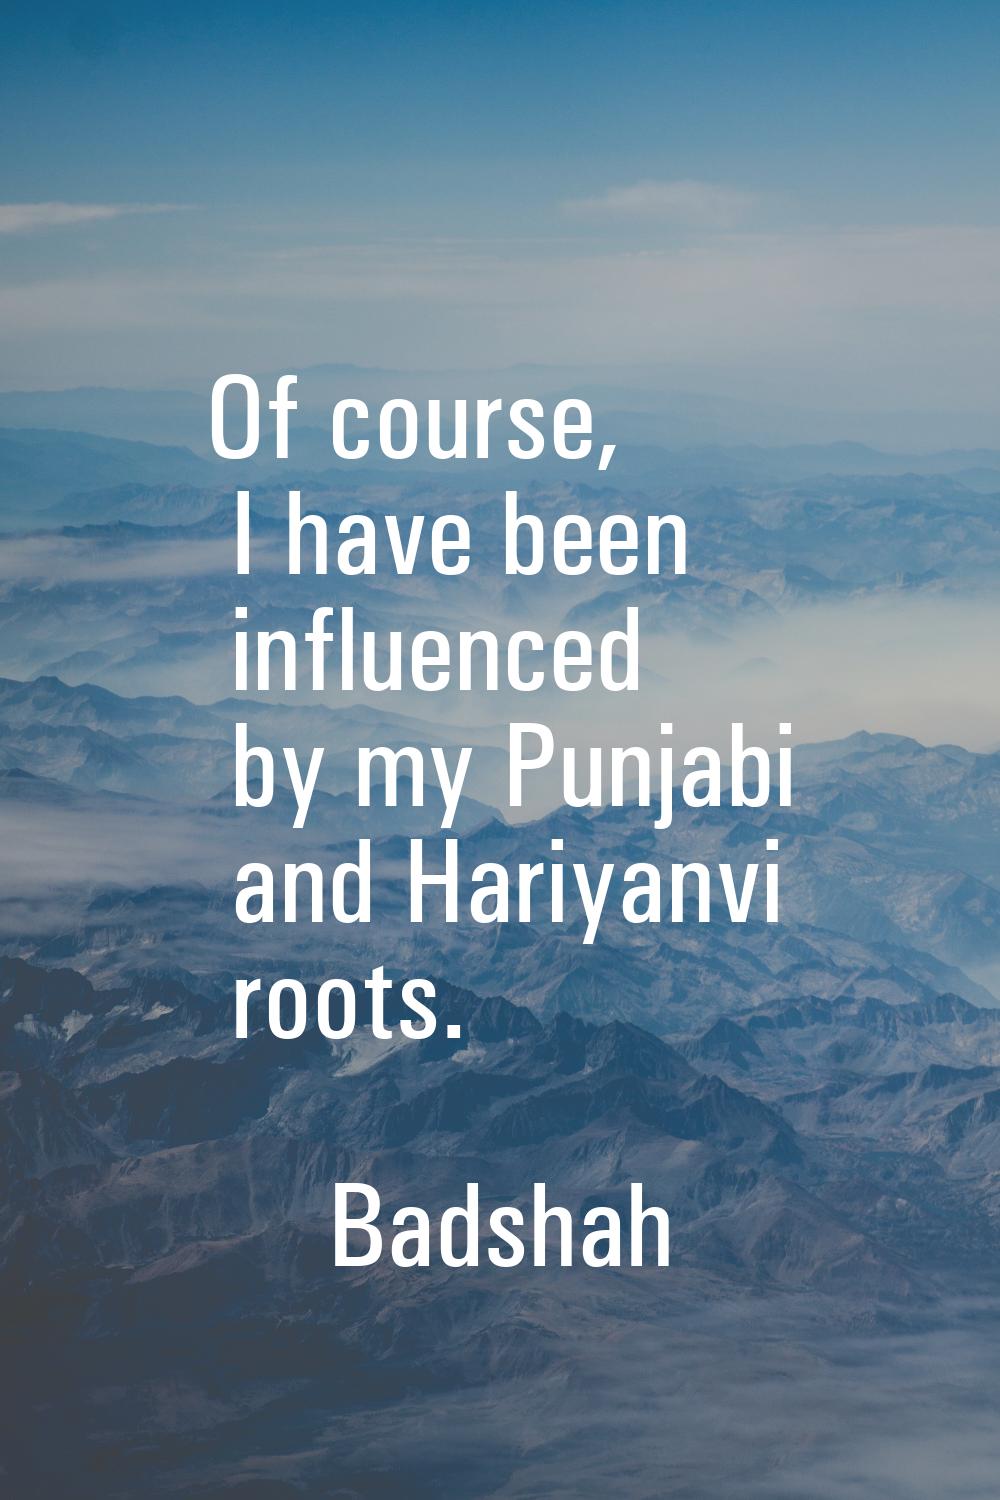 Of course, I have been influenced by my Punjabi and Hariyanvi roots.